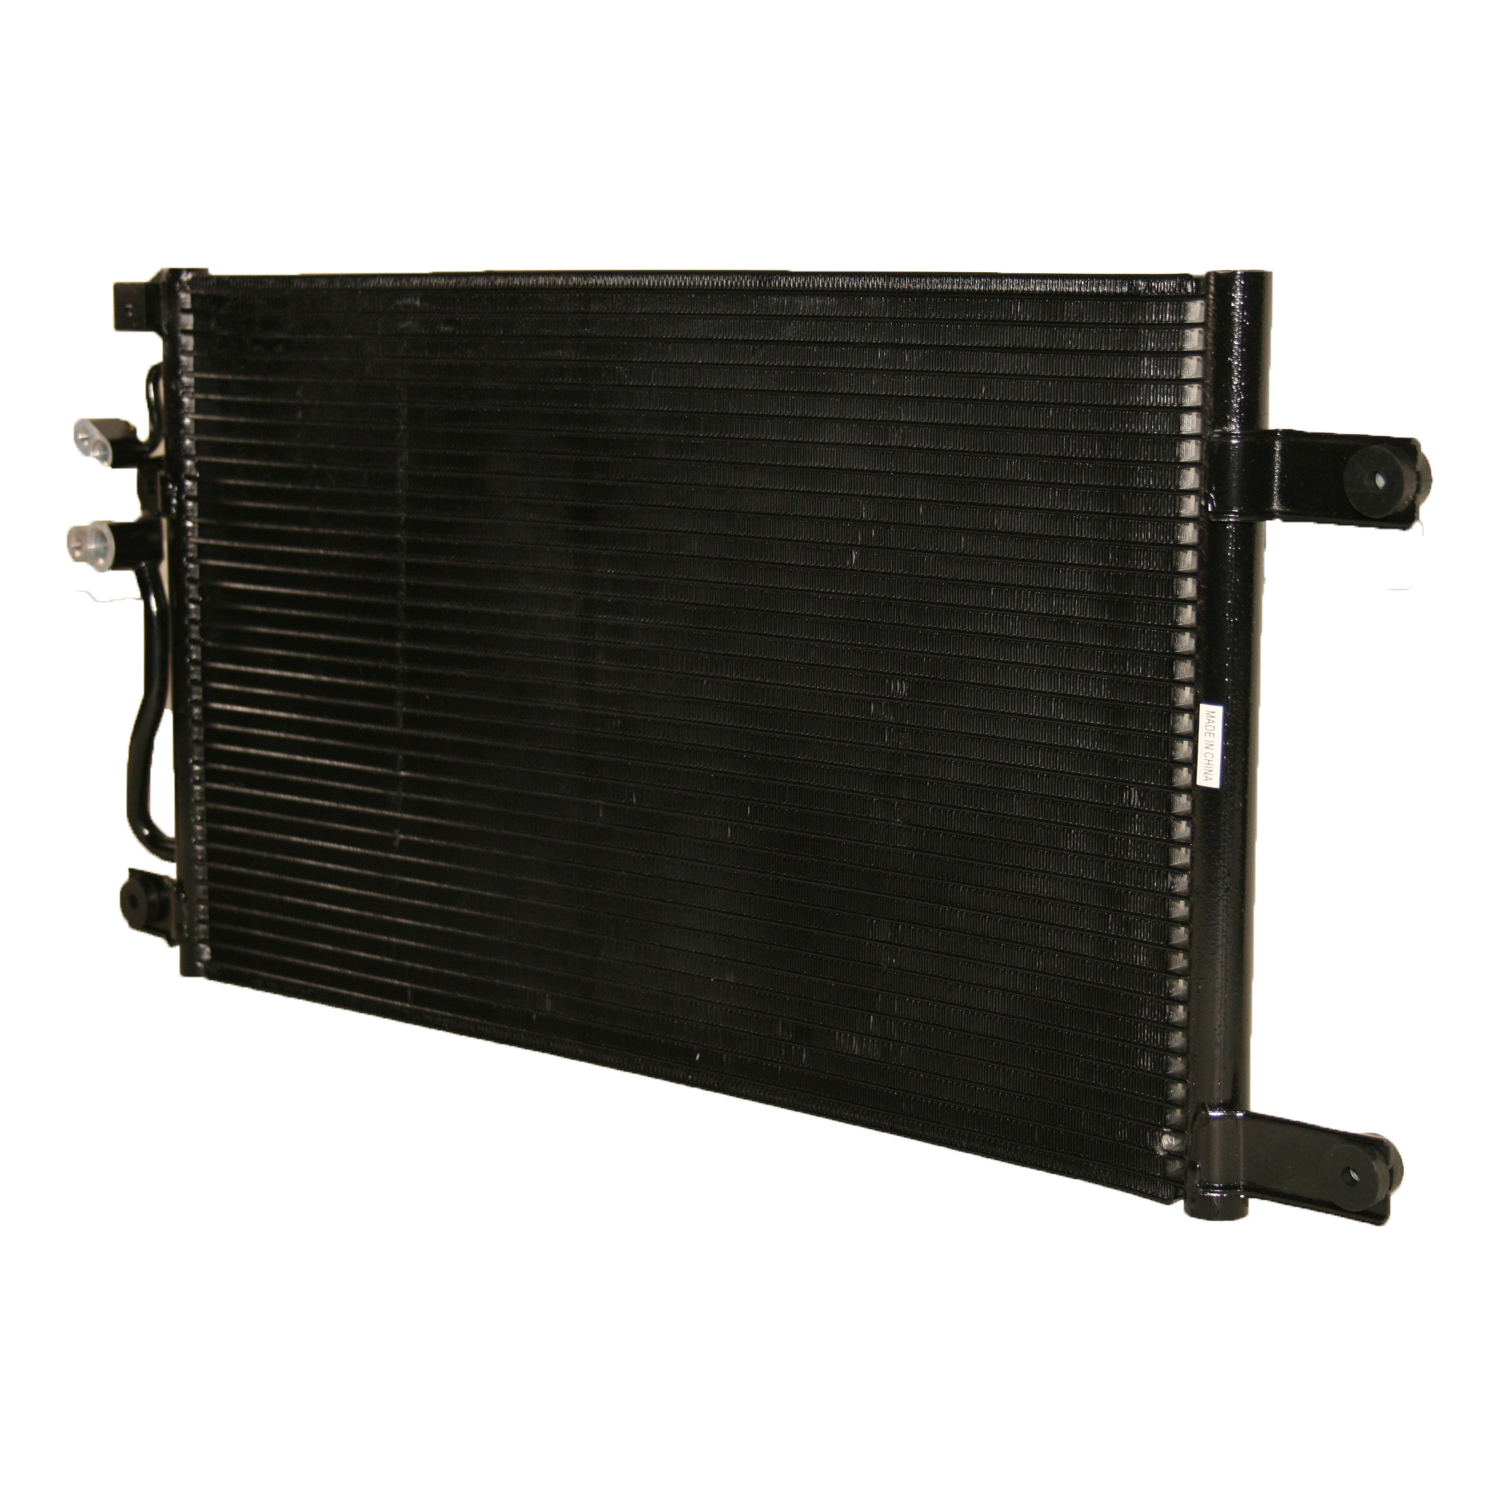 TCW Condenser 44-4839 New Product Image field_60b6a13a6e67c